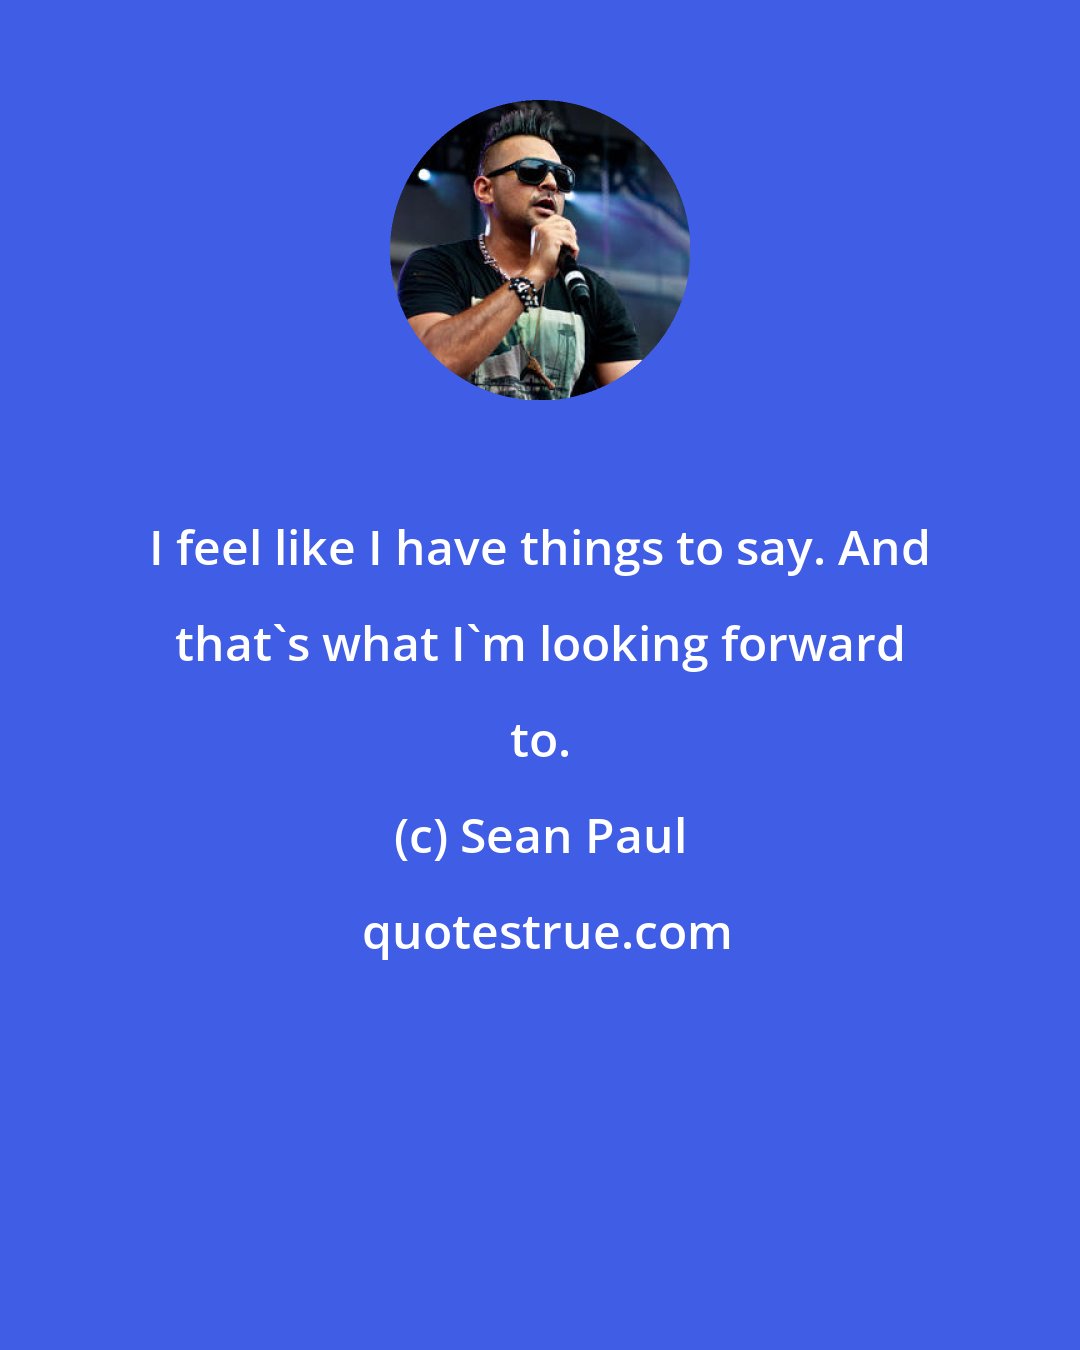 Sean Paul: I feel like I have things to say. And that's what I'm looking forward to.